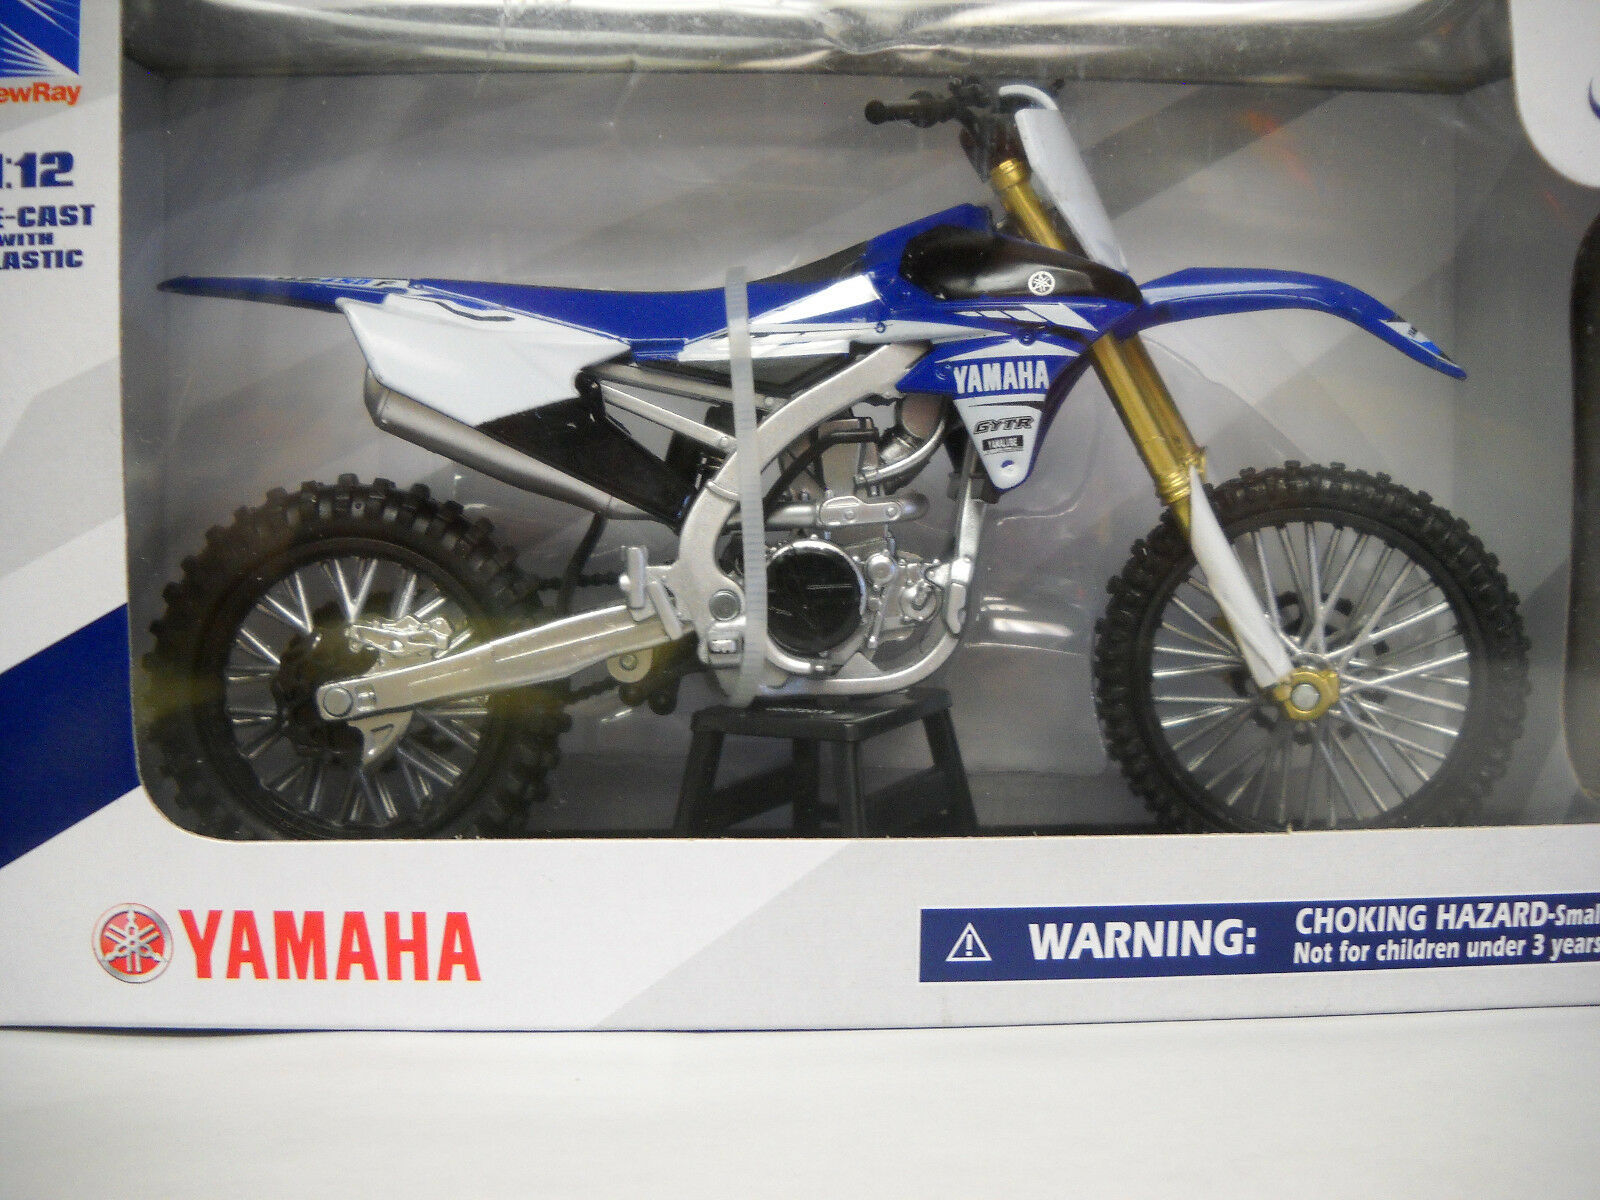 Yamaha Yz450f 2017 1/12 Motorcycle Model Dirt Bike Toy By New Ray 57983